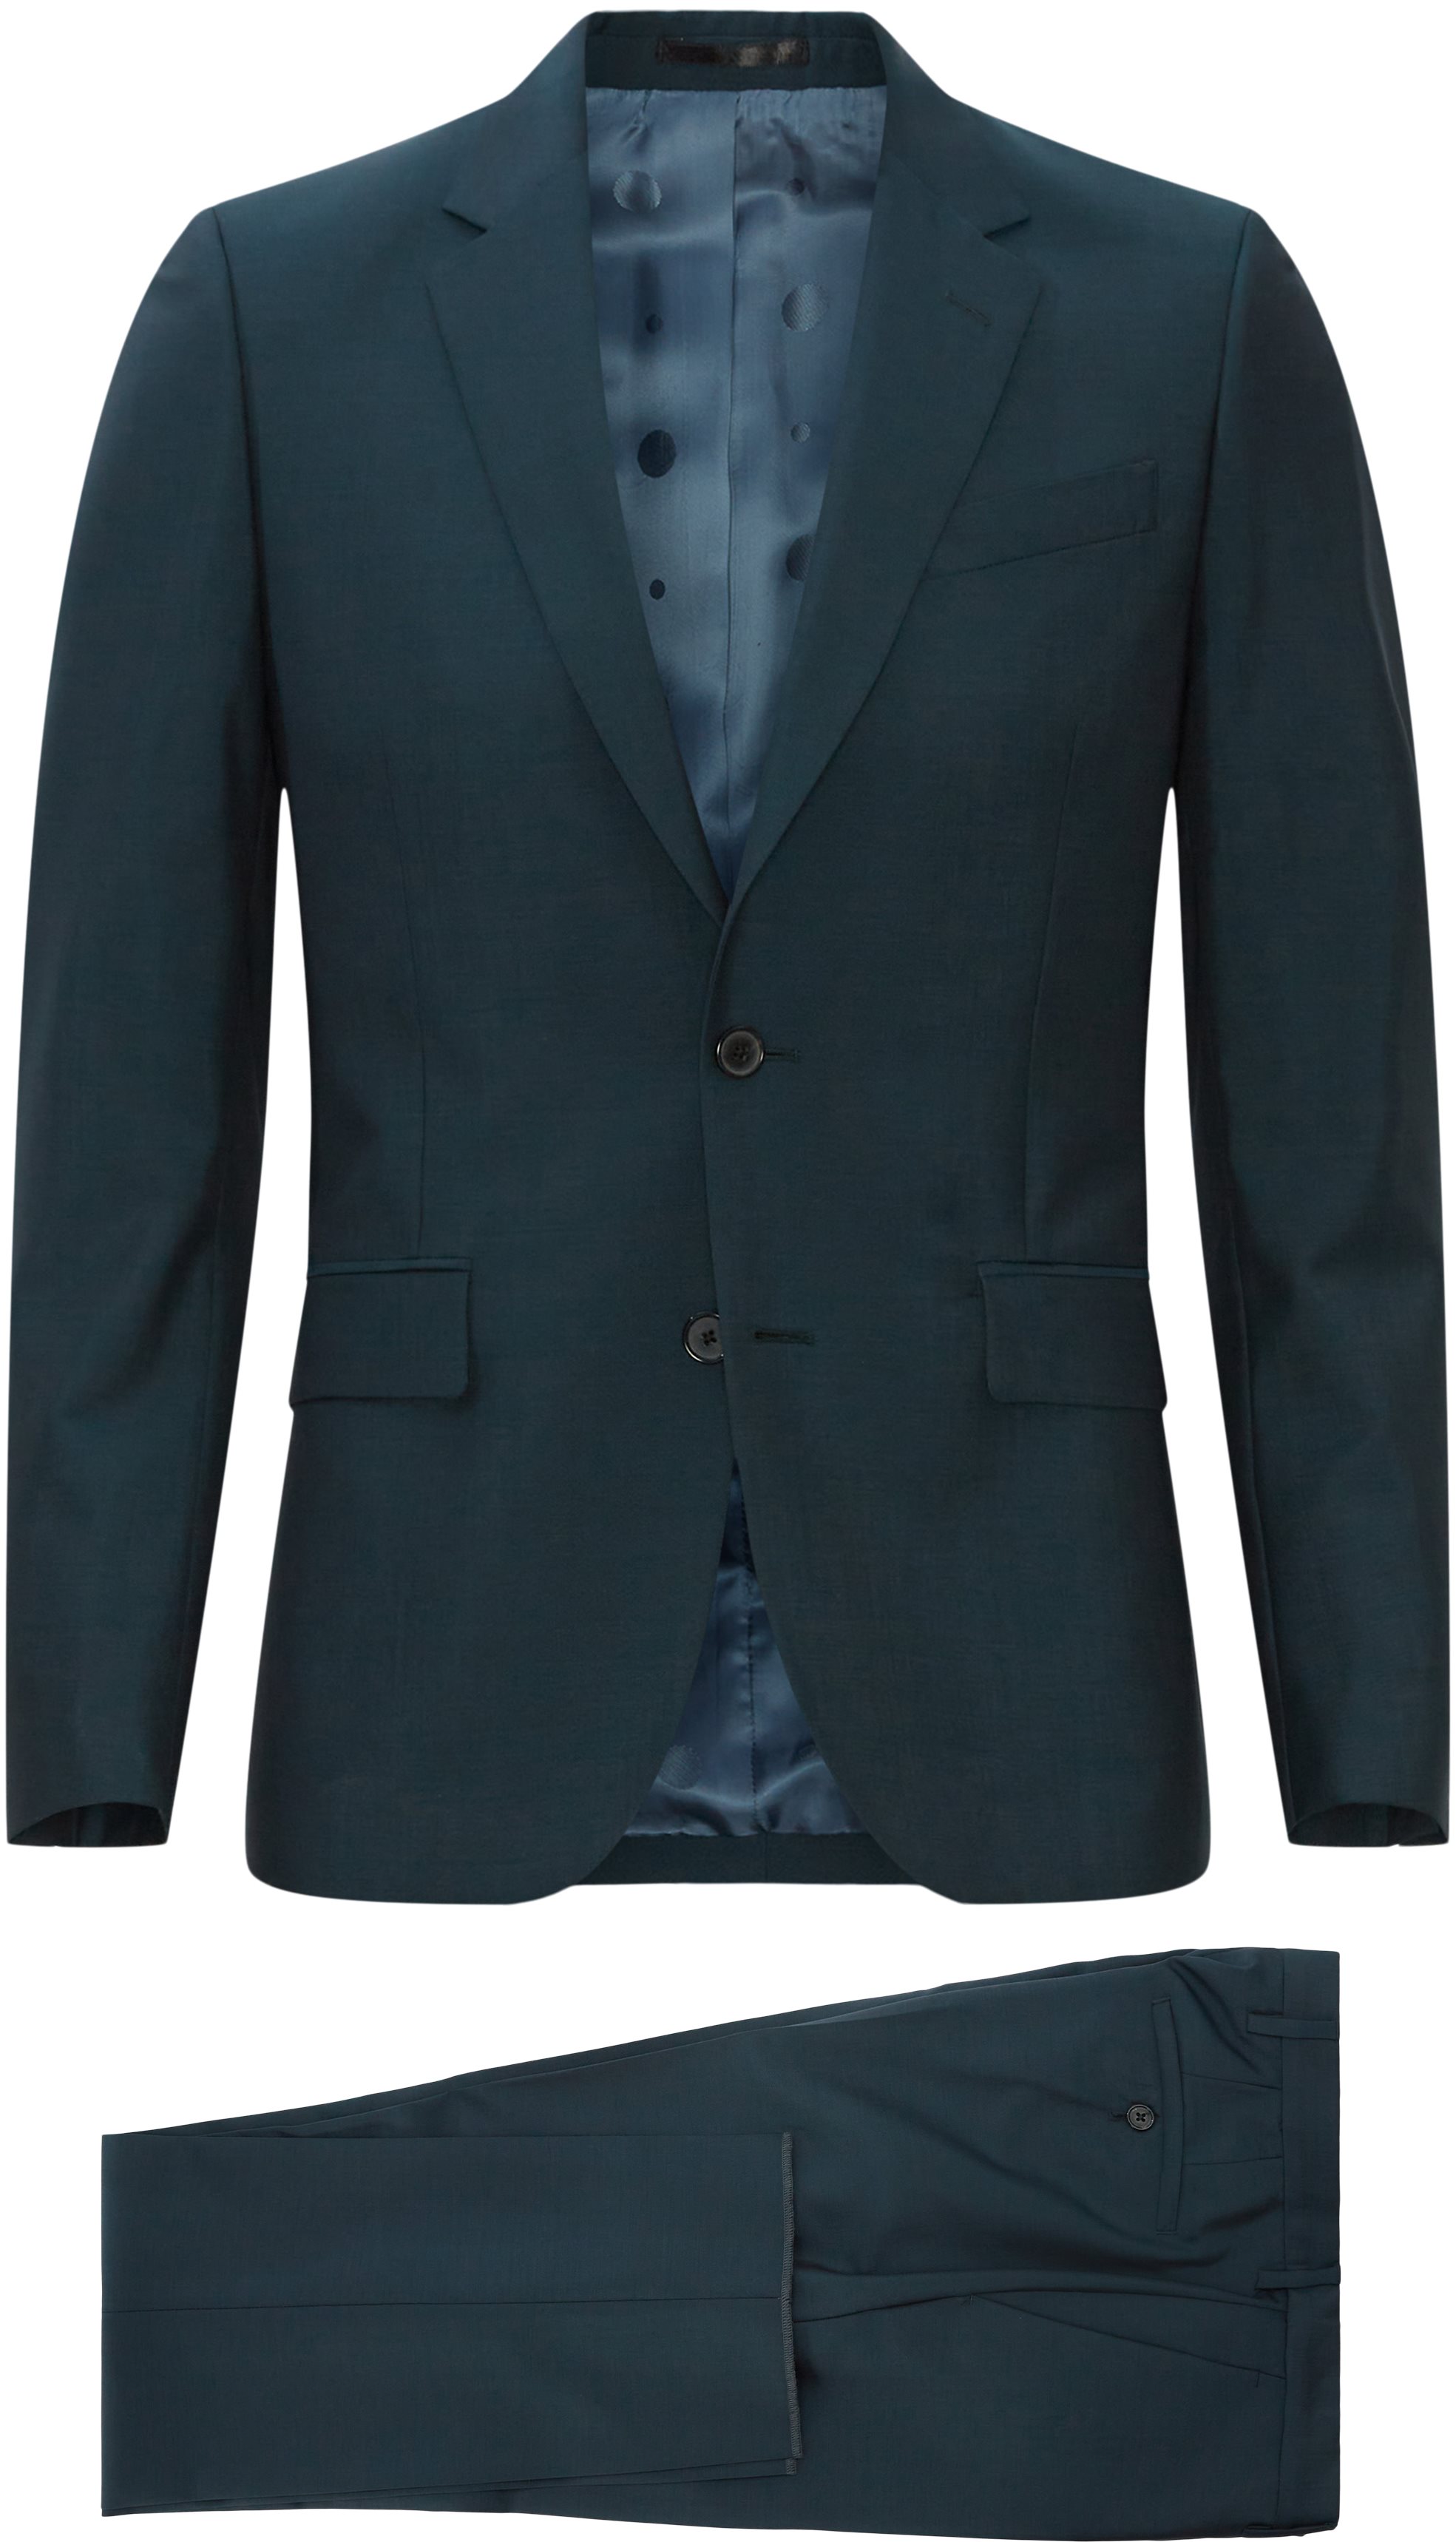 Paul Smith Mainline Suits 1457 M00002 Green